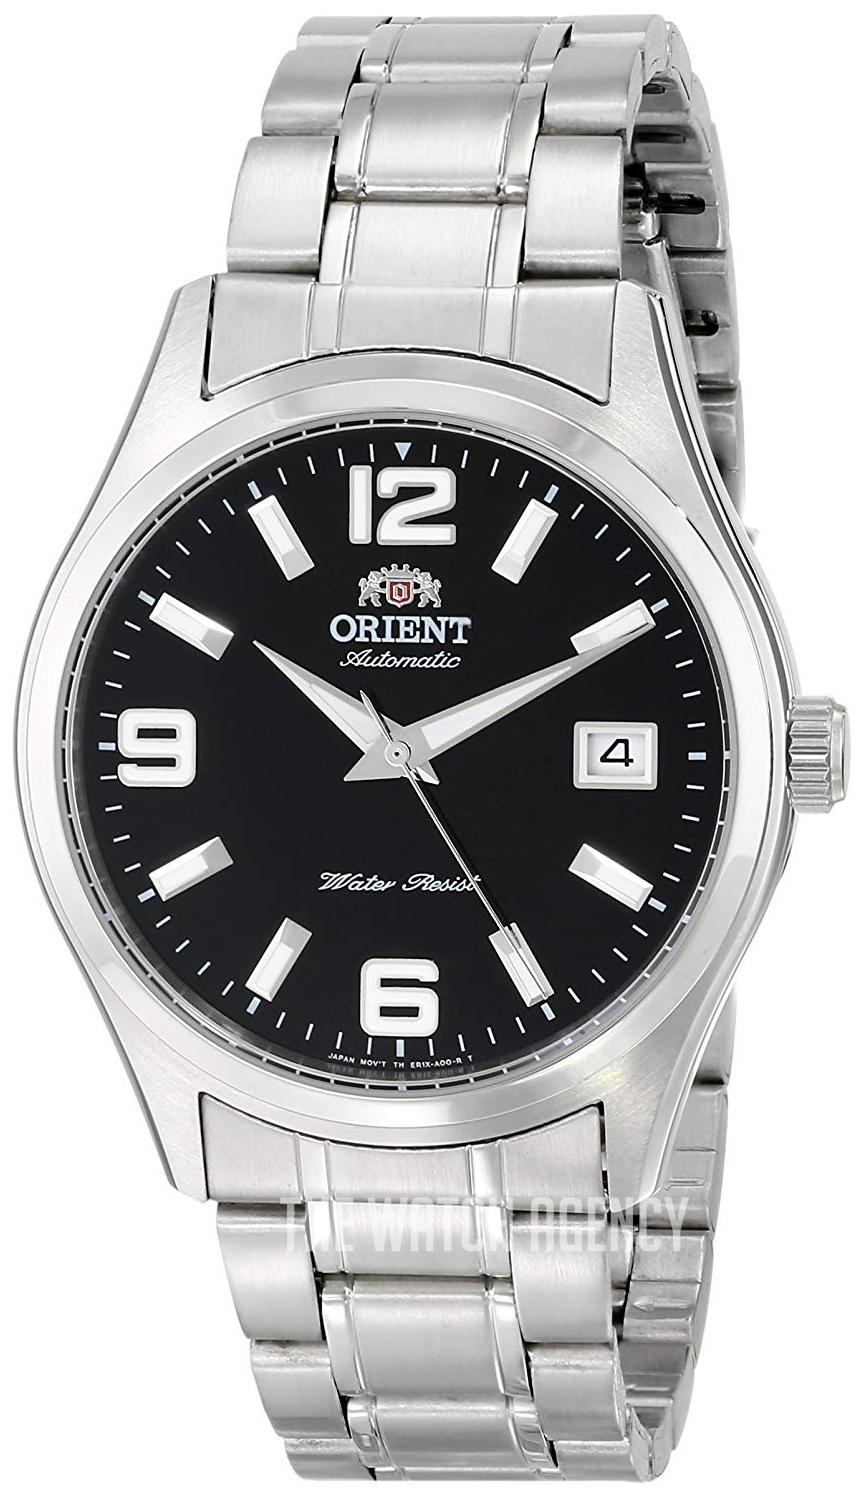 Orient Chicane Automático for $200 for sale from a Private Seller on  Chrono24